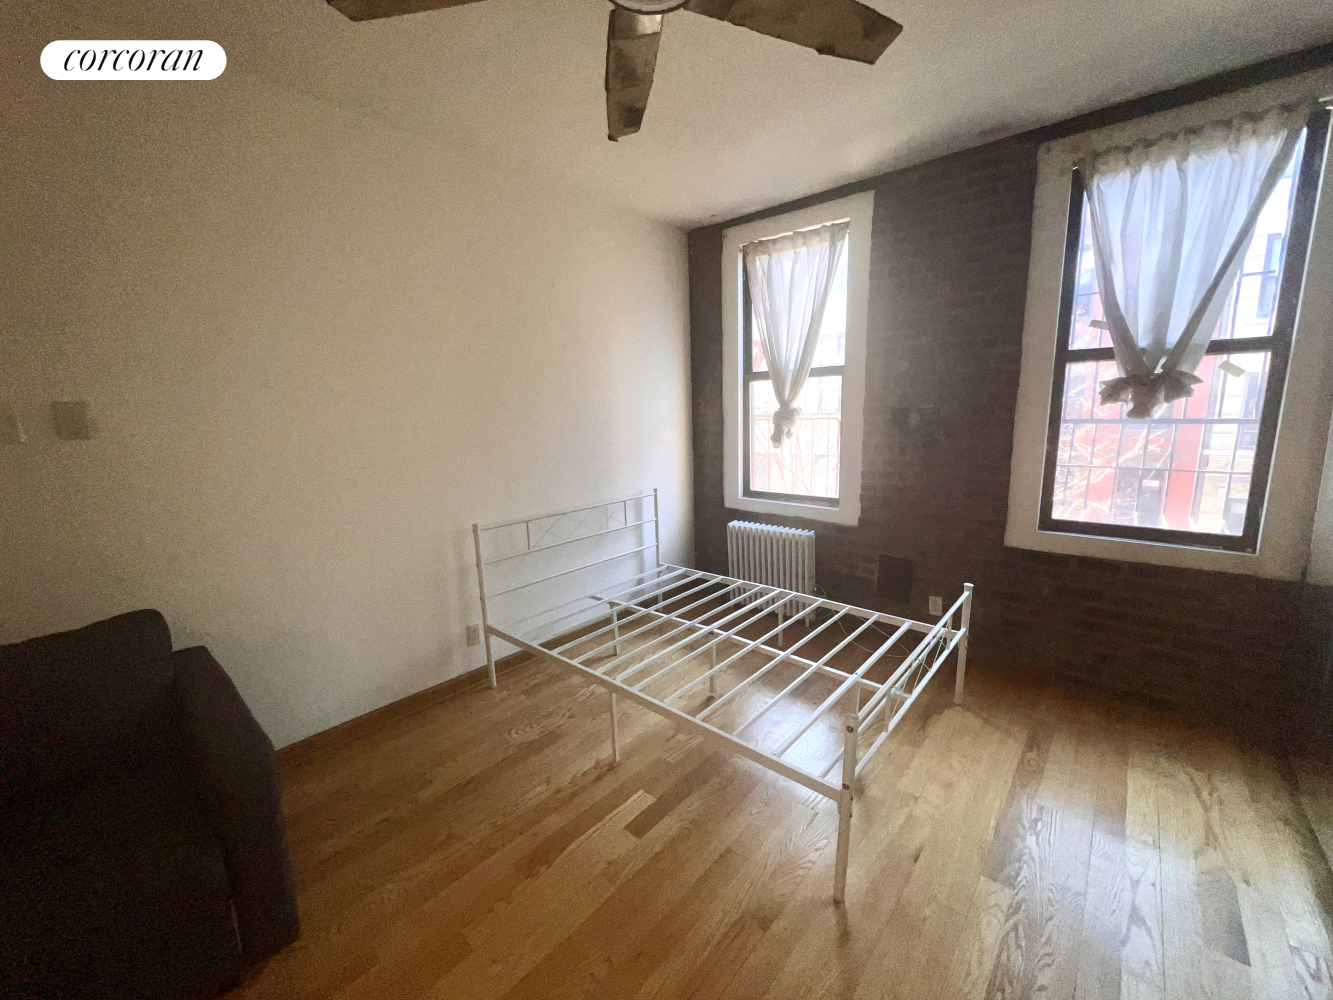 70 Orchard Street 12, Lower East Side, Downtown, NYC - 1 Bathrooms  
1 Rooms - 